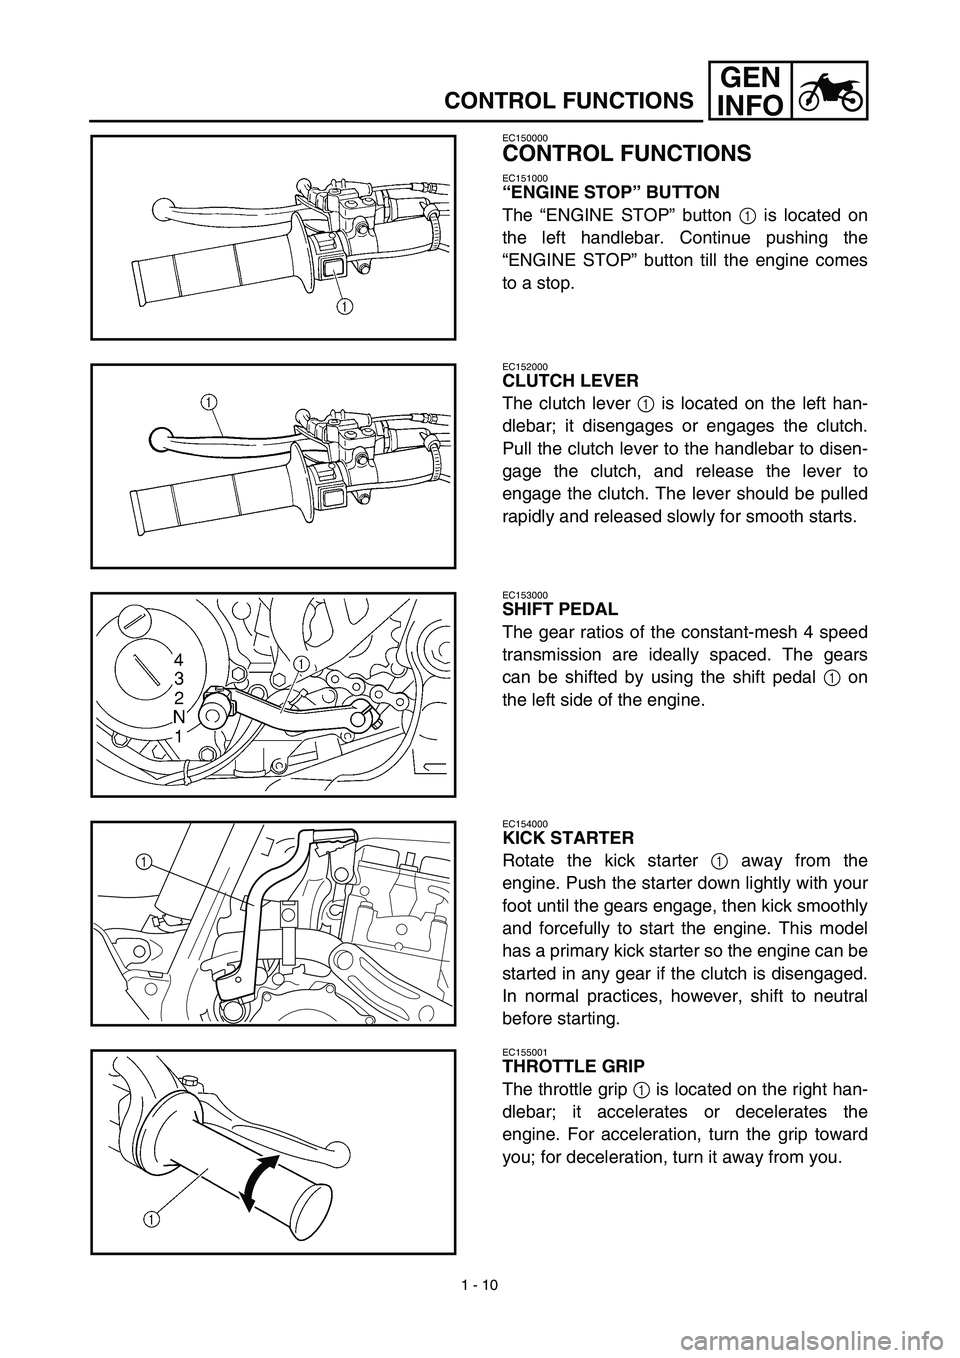 YAMAHA YZ450F 2003  Owners Manual 1 - 10
GEN
INFO
CONTROL FUNCTIONS
EC150000
CONTROL FUNCTIONS
EC151000
“ENGINE STOP” BUTTON
The “ENGINE STOP” button 1 is located on
the left handlebar. Continue pushing the
“ENGINE STOP” b